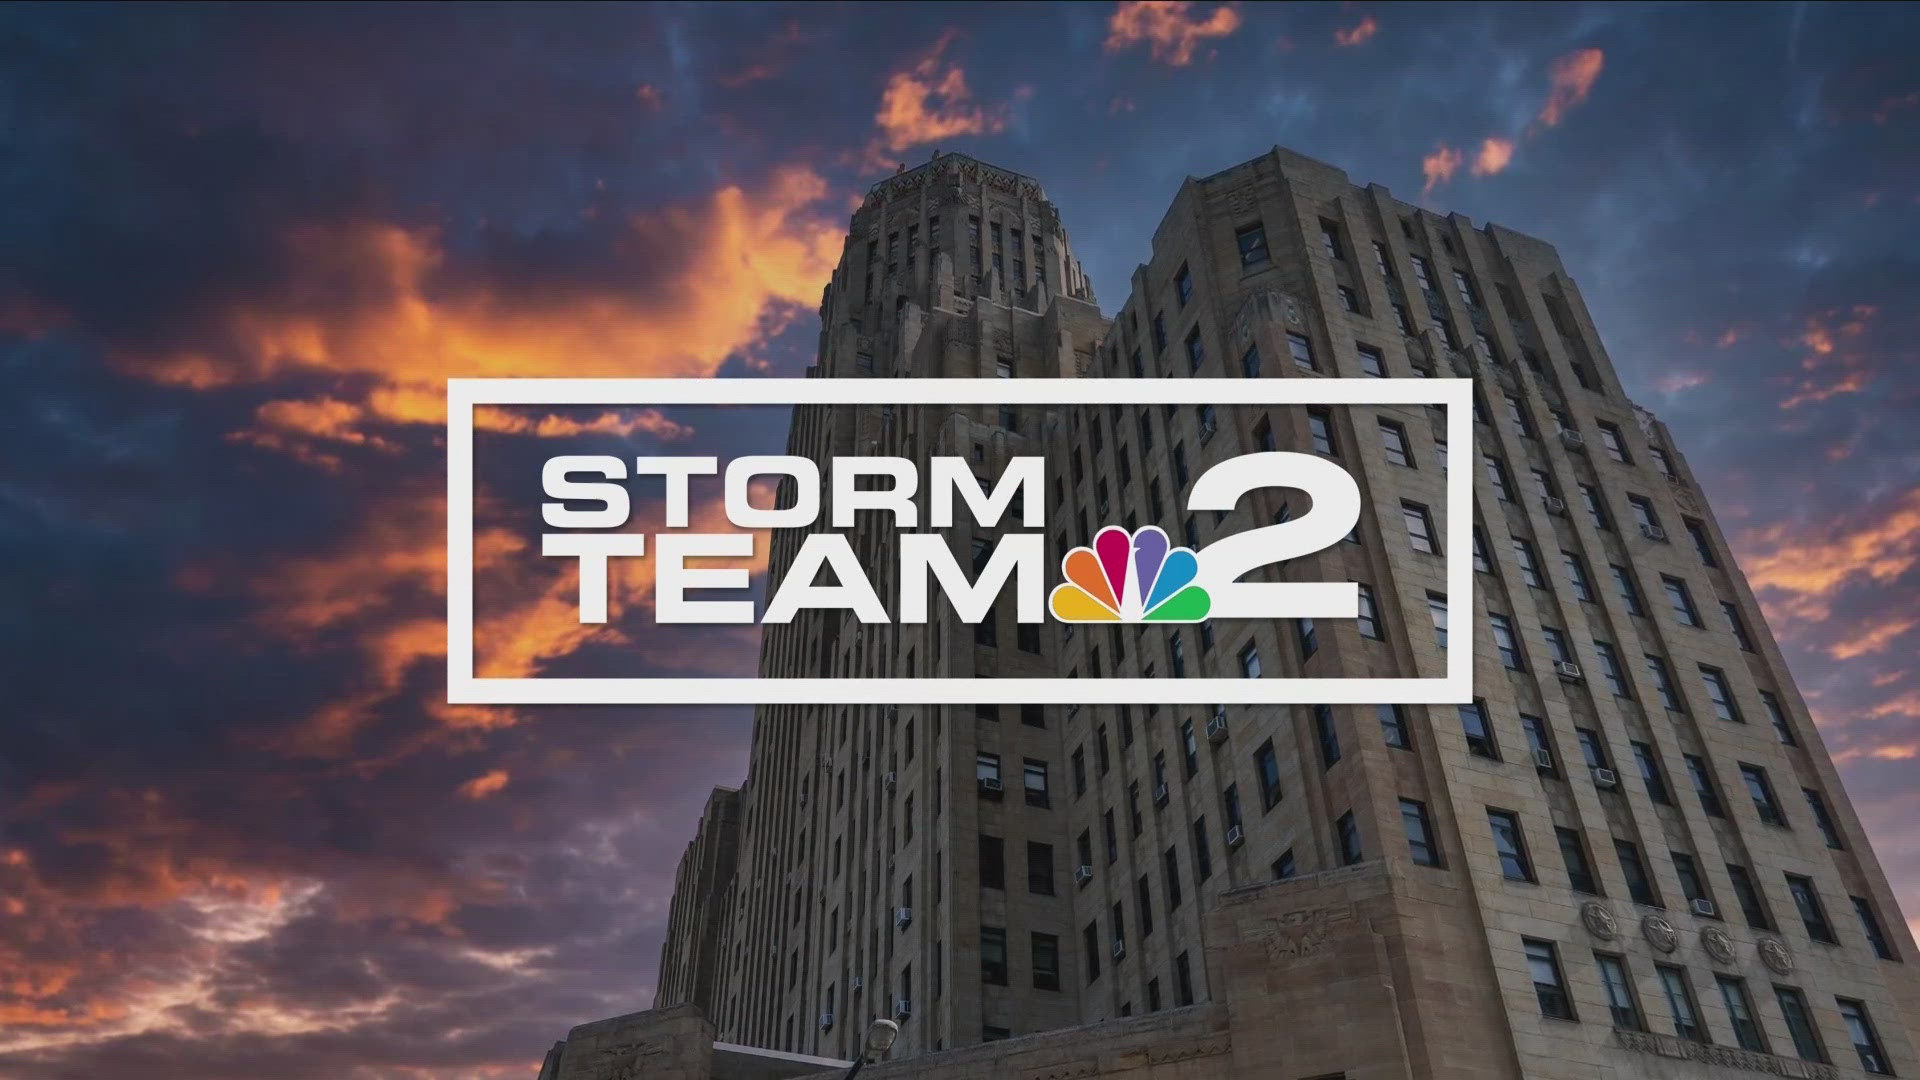 Storm Team 2 night forecast with Paul Hare for Friday, June 14.